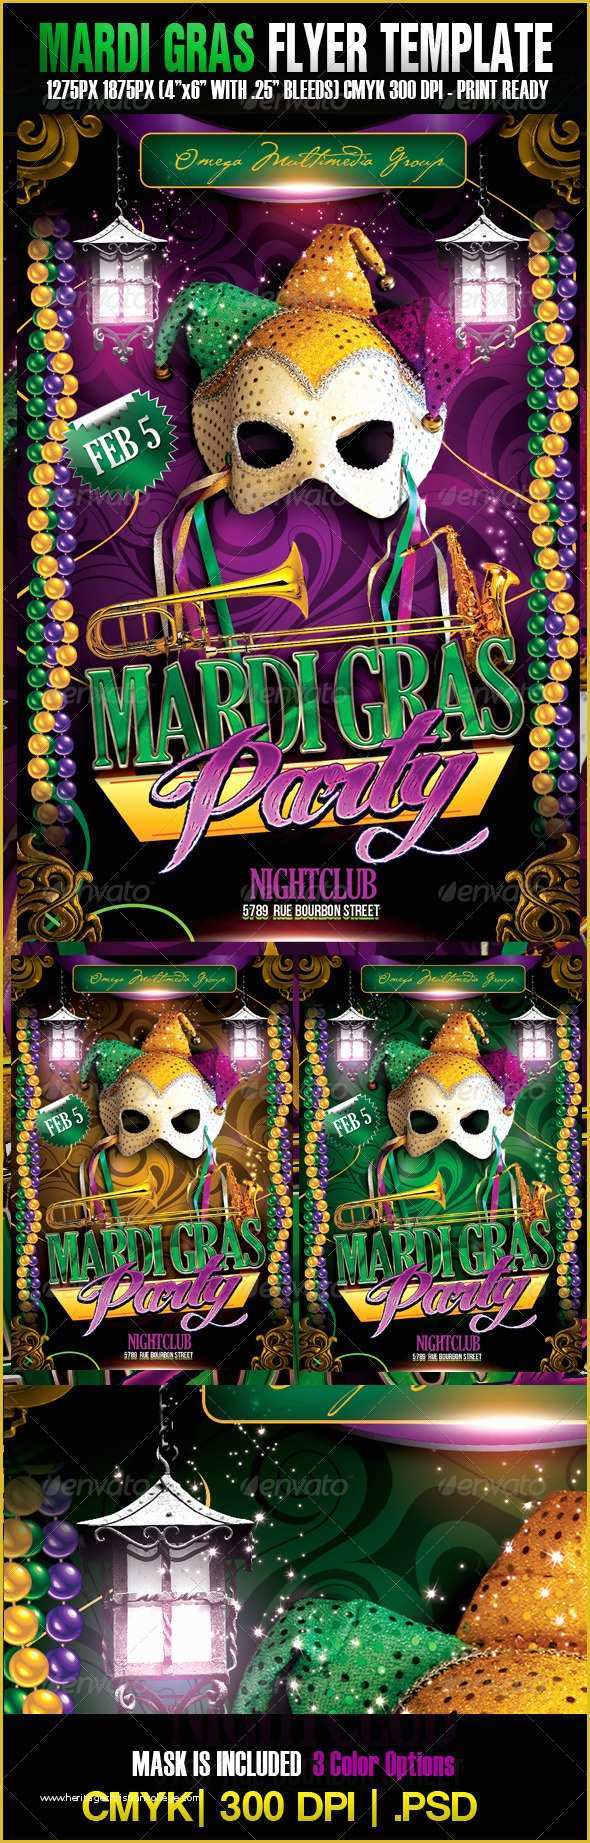 Mardi Gras Powerpoint Template Free Of the Mardi Gras Template by Omegamultimedia